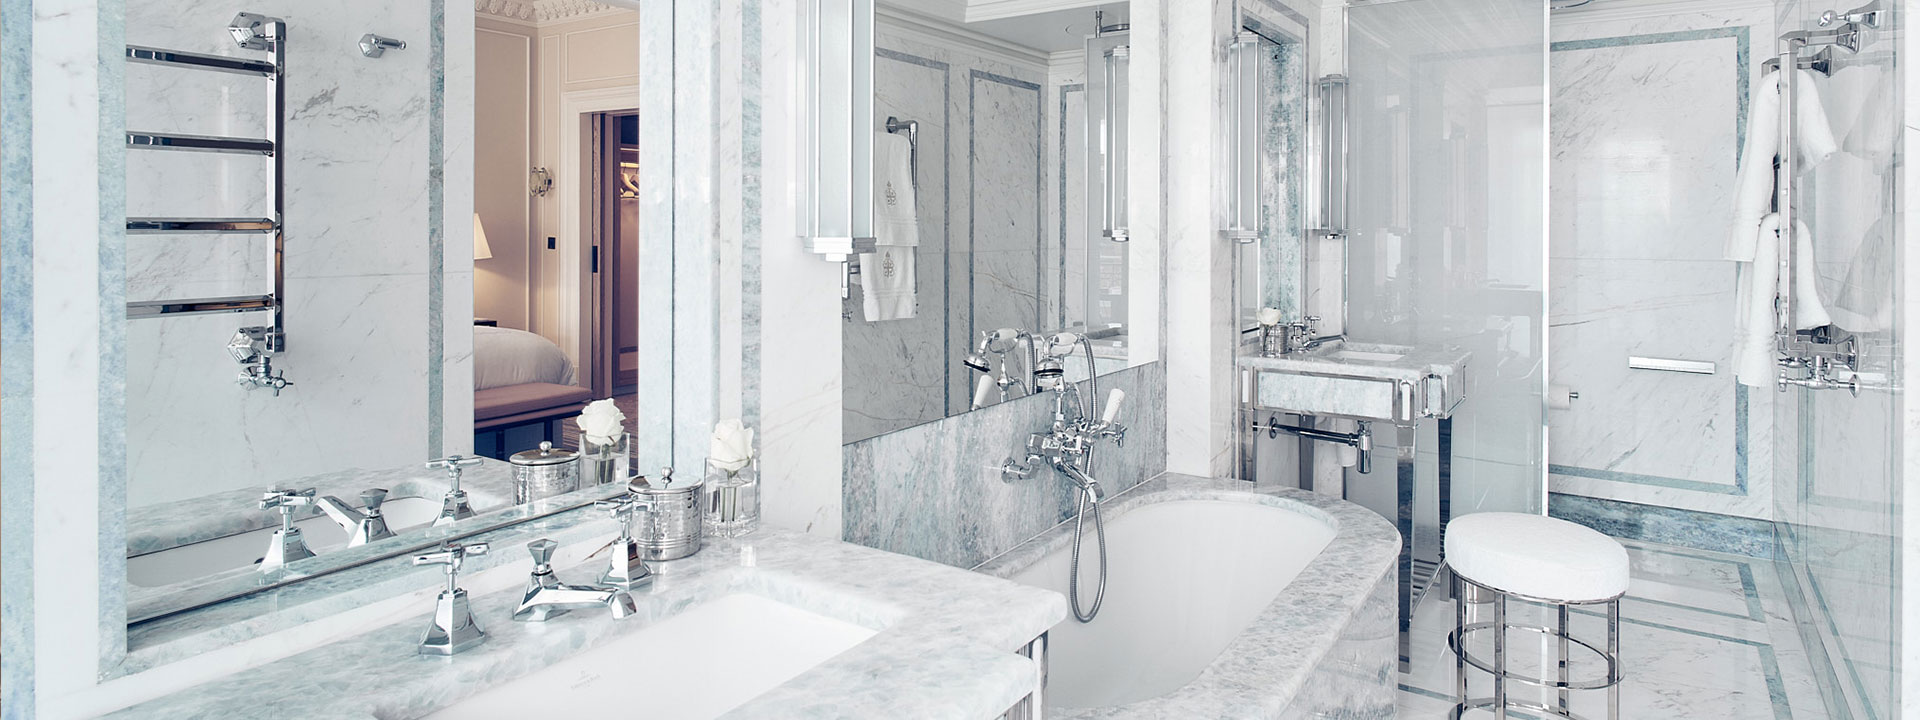 Twin basins, bath and walk-in shower in the luxurious marble design of the Mayfair Suite.